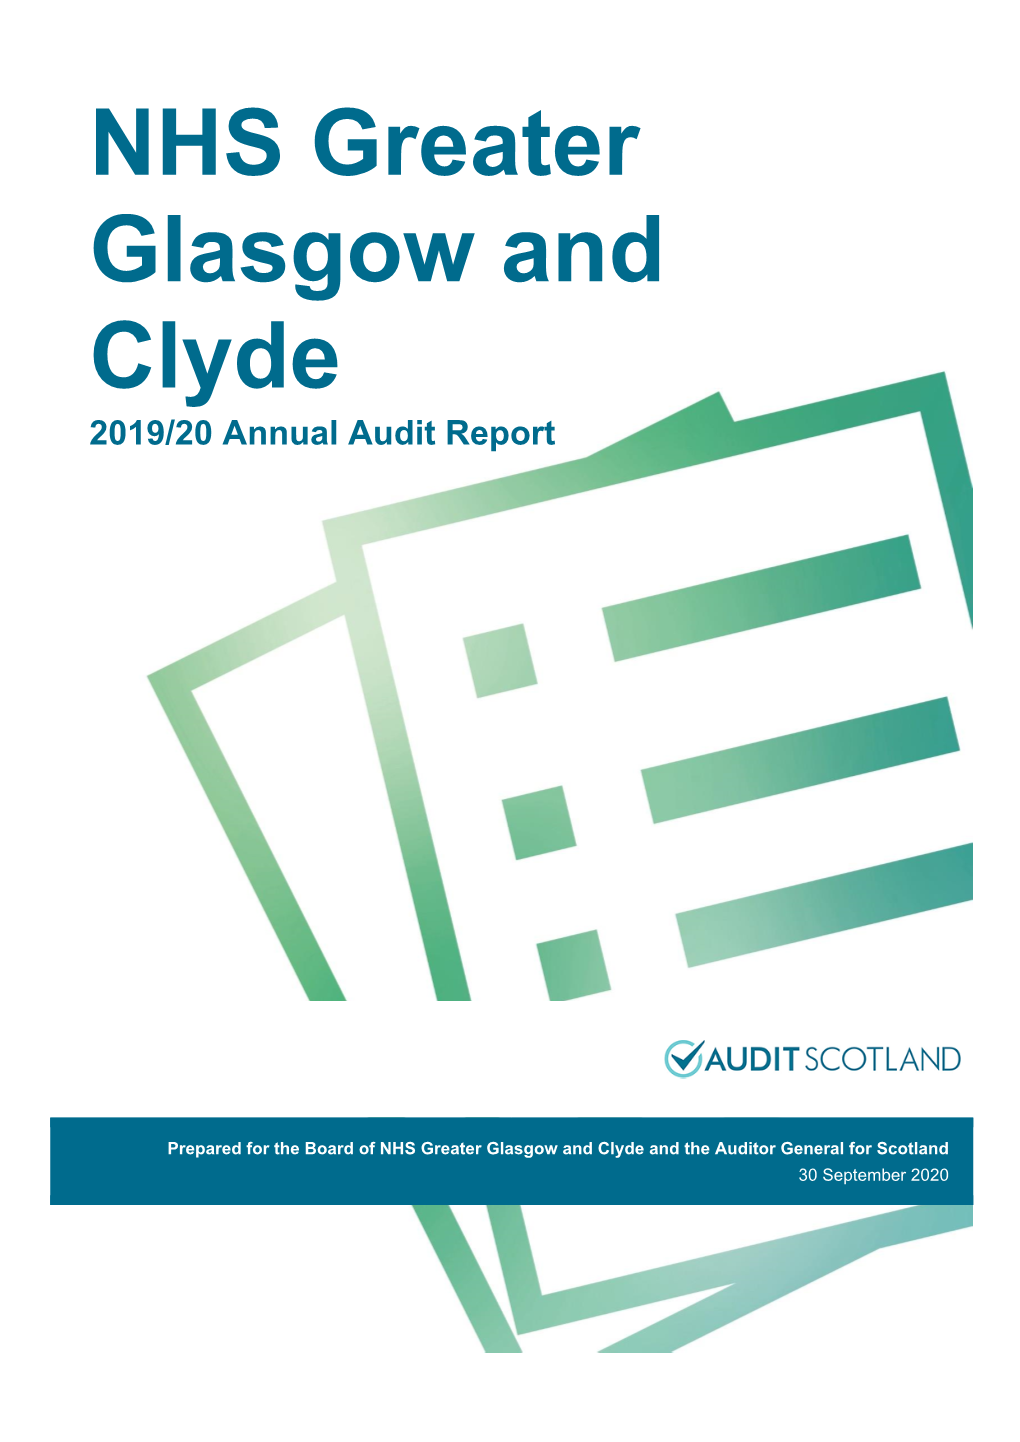 NHS Greater Glasgow and Clyde 2019/20 Annual Audit Report